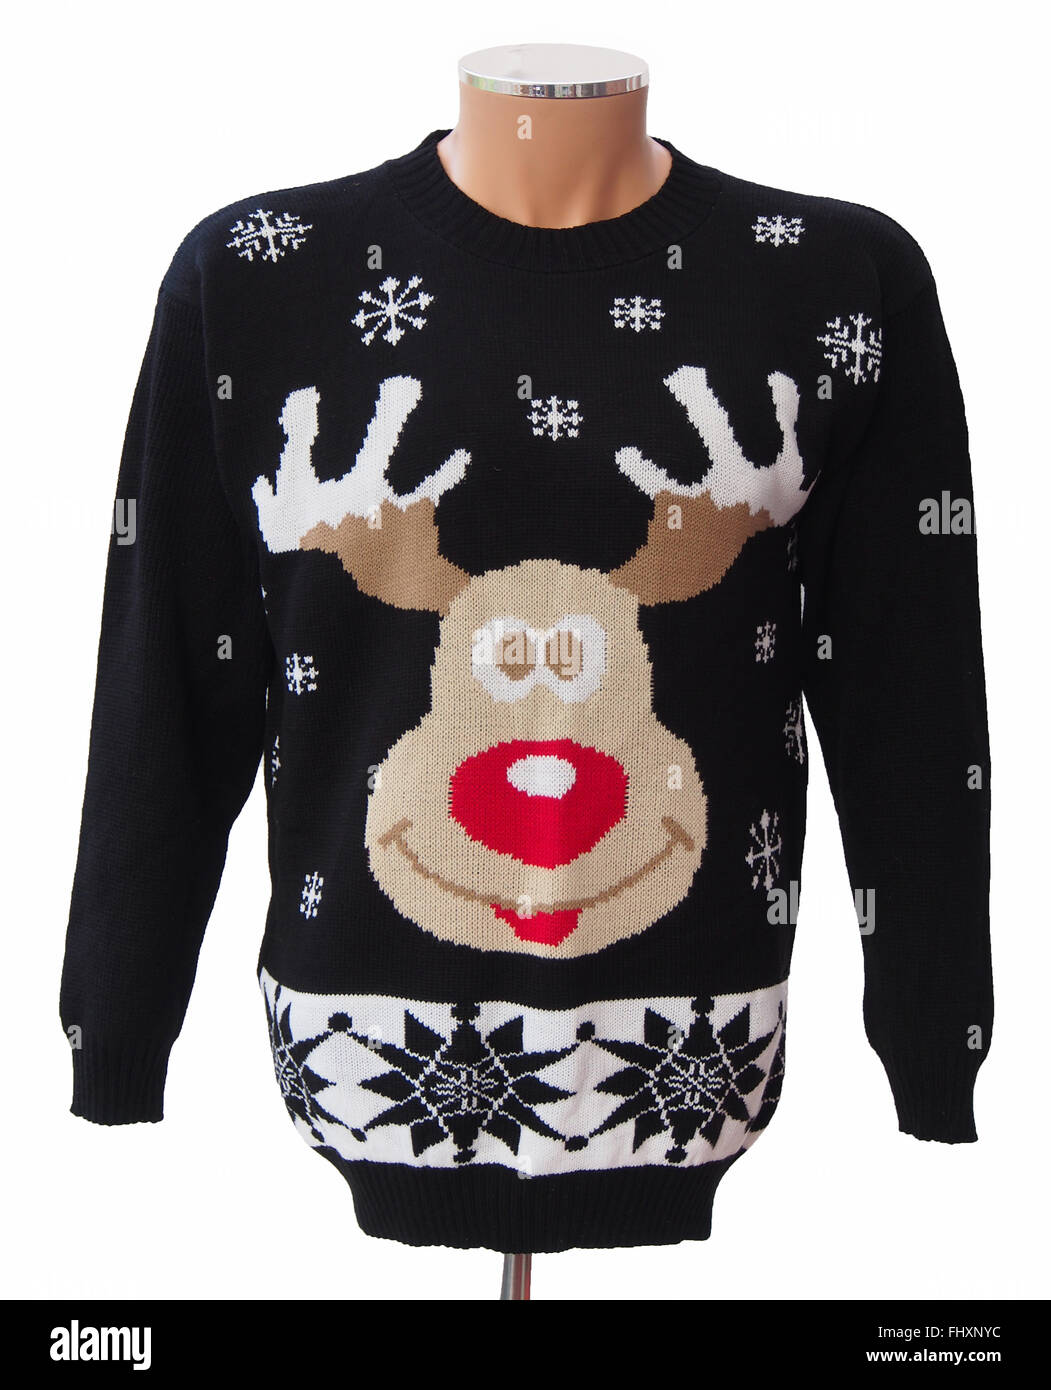 Black knitted adults' Christmas jumper, featuring Rudolph the red nosed reindeer and snowflakes, isolated on a white background. Stock Photo